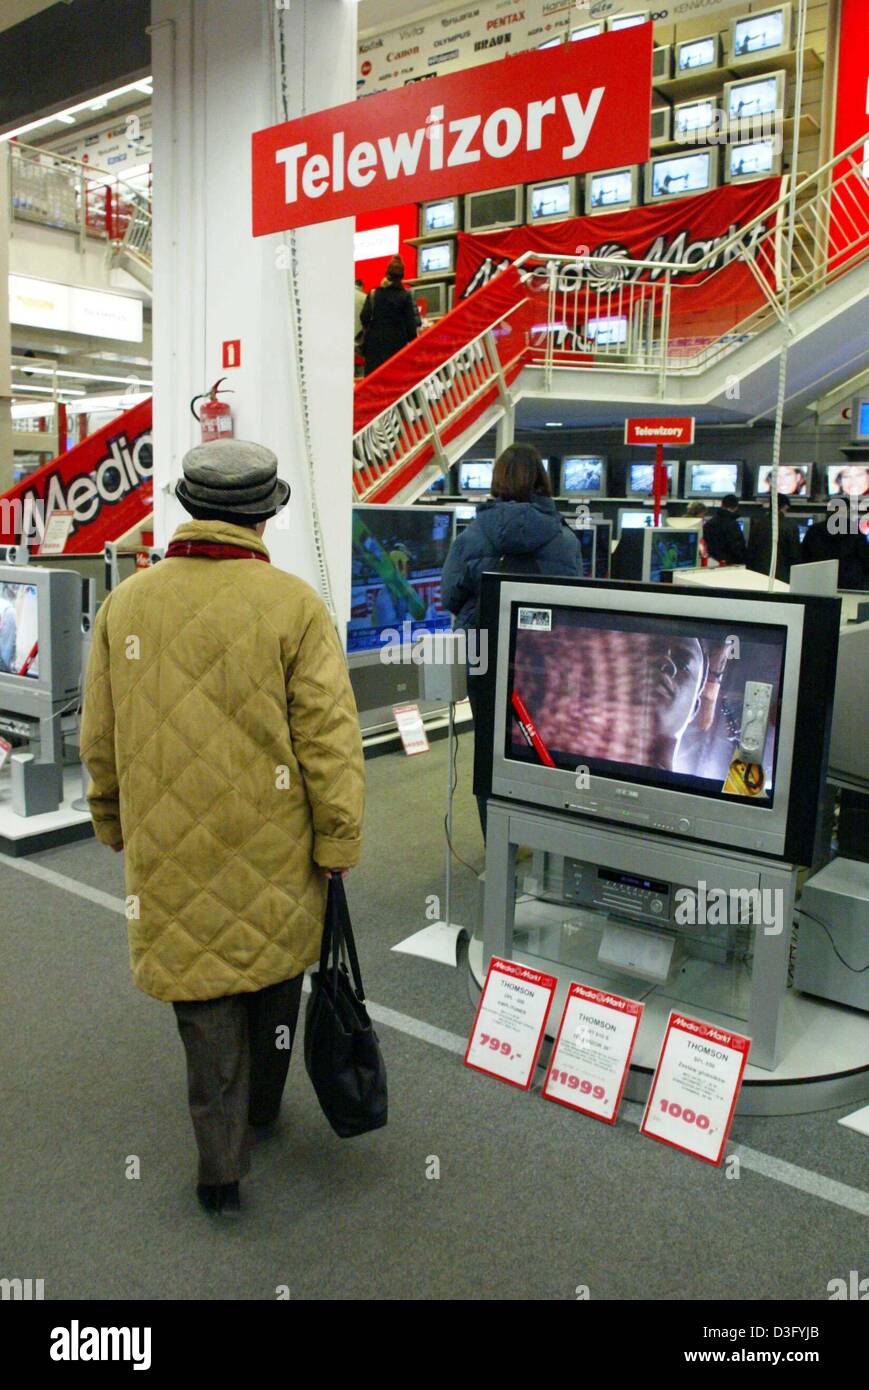 toilet Slaapzaal helikopter dpa) - A customer looks at TV sets in a supermarket of the consumer  electronics retailer chain 'Media Markt' in Warsaw, Poland, 10 January  2003. According to company information, Media Markt is